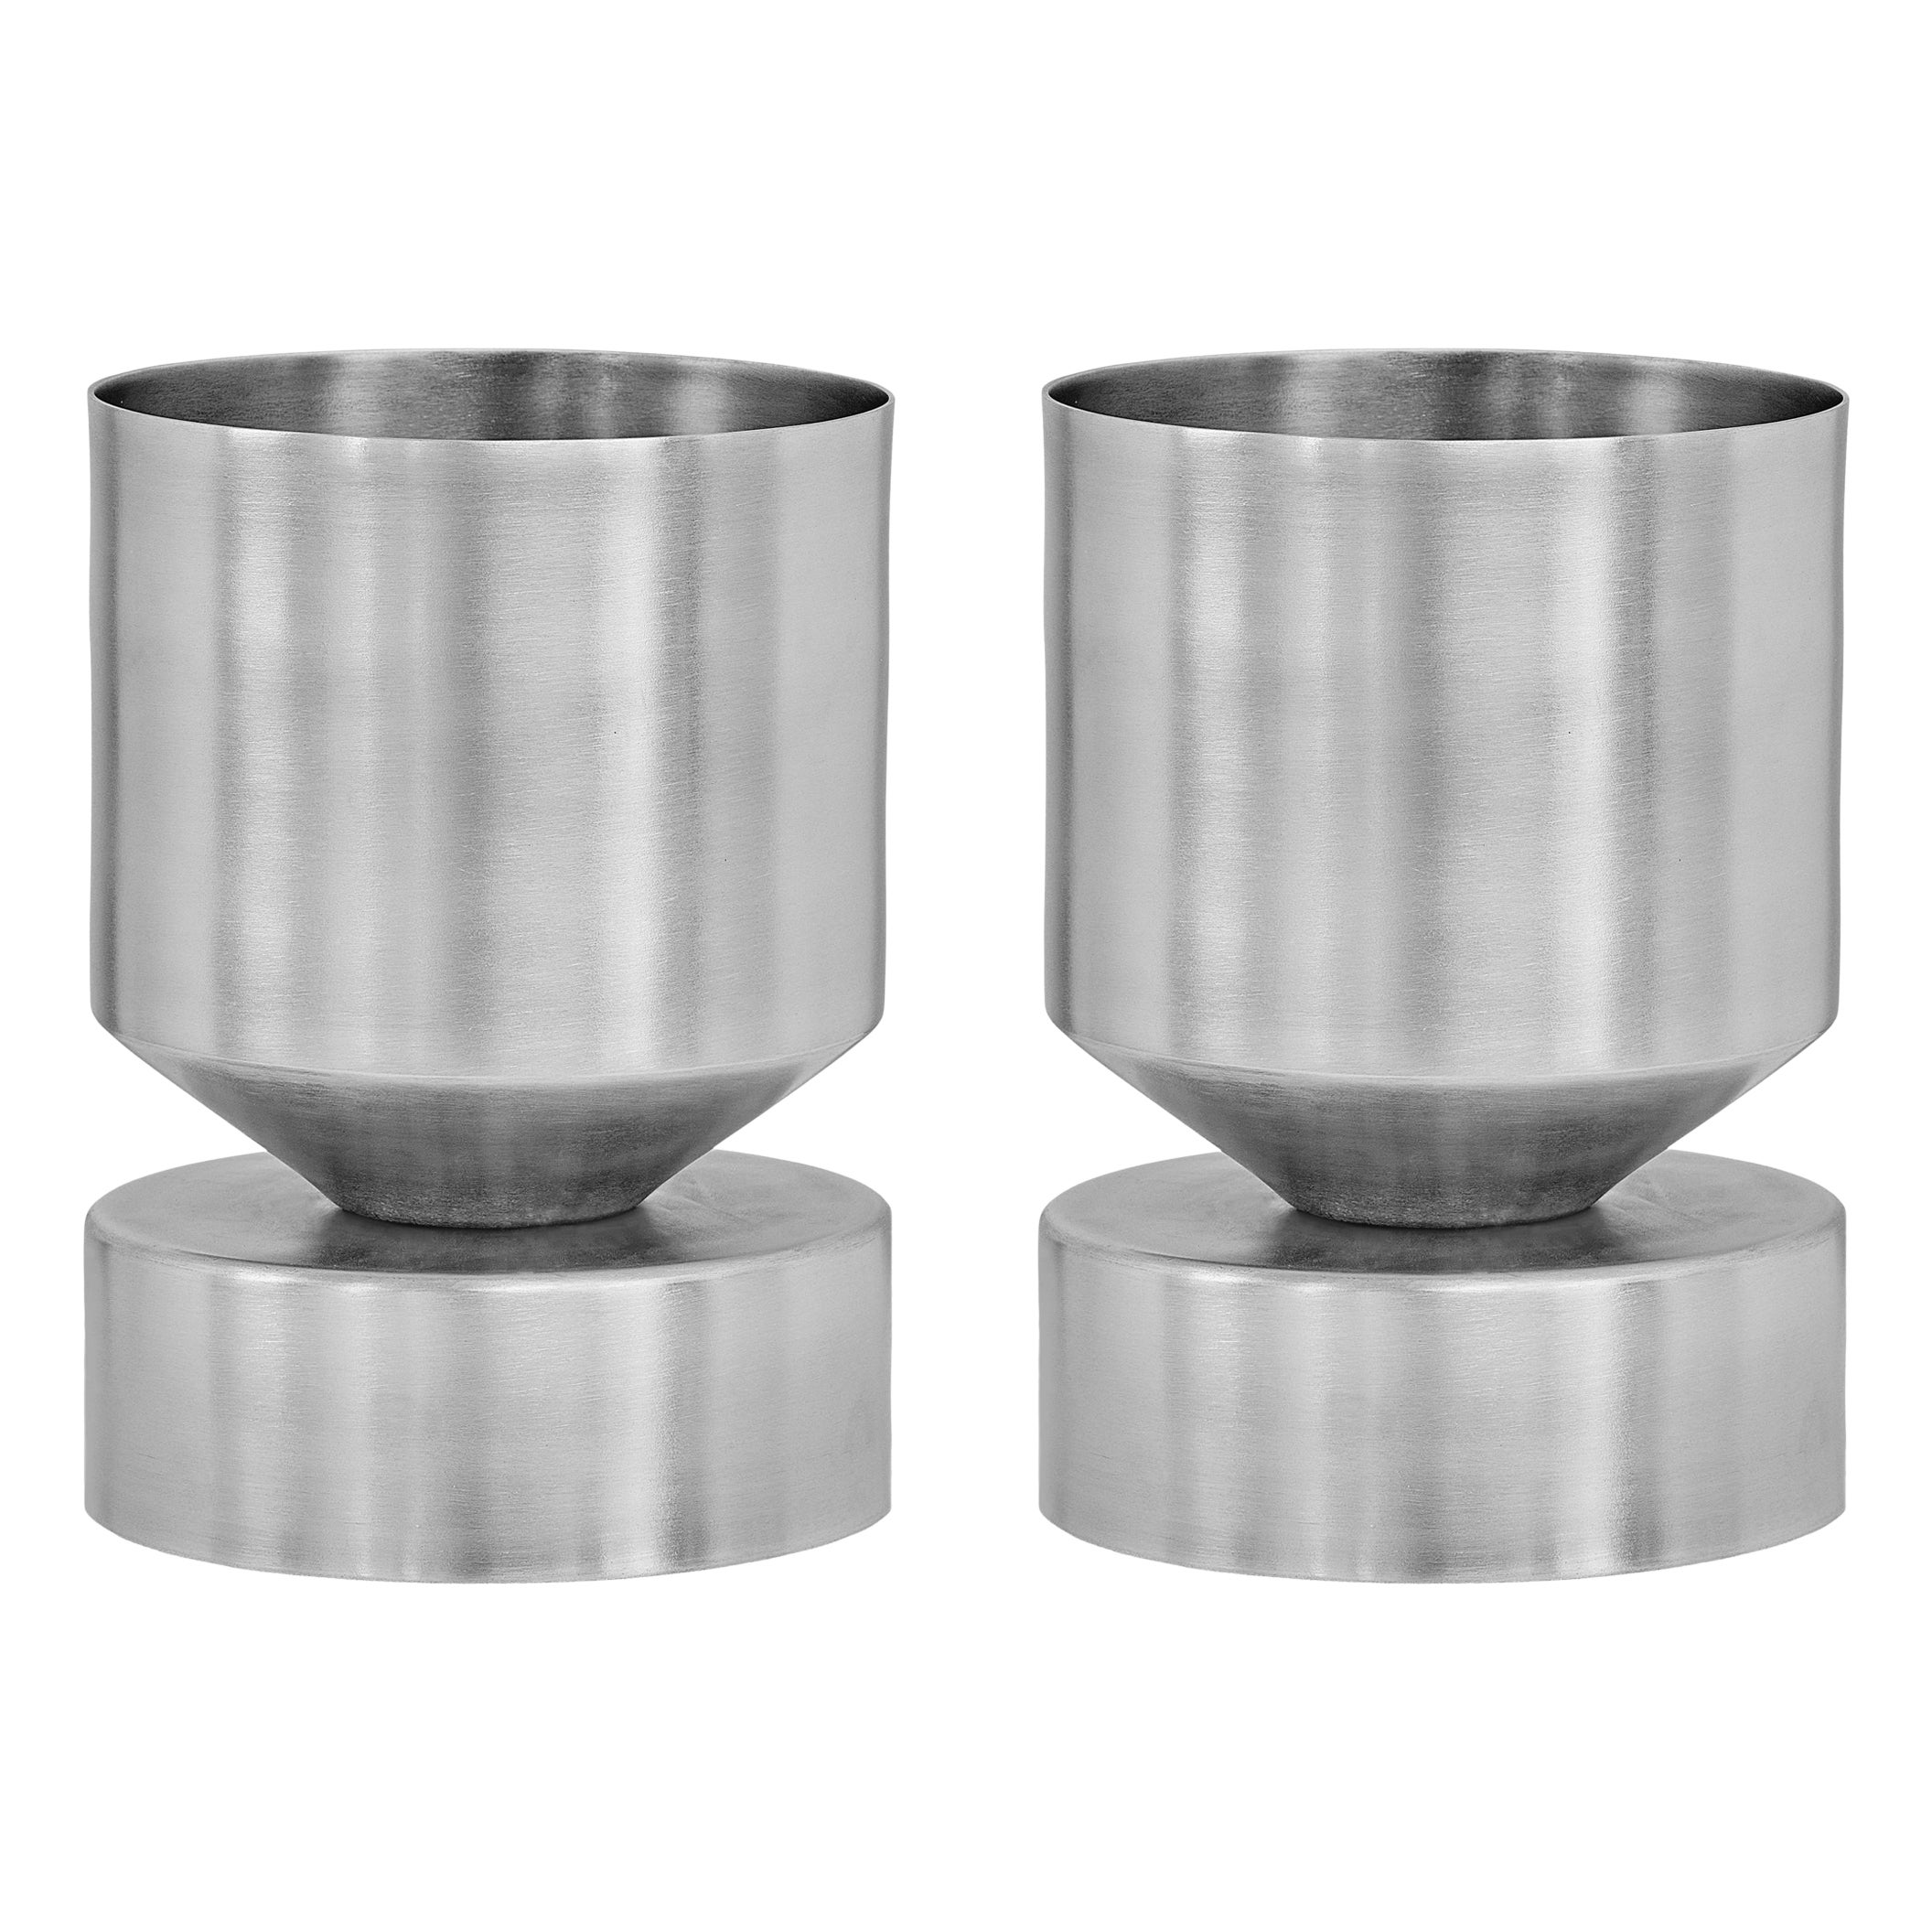 Set of 2 Small Ada Planters by Llot Llov For Sale